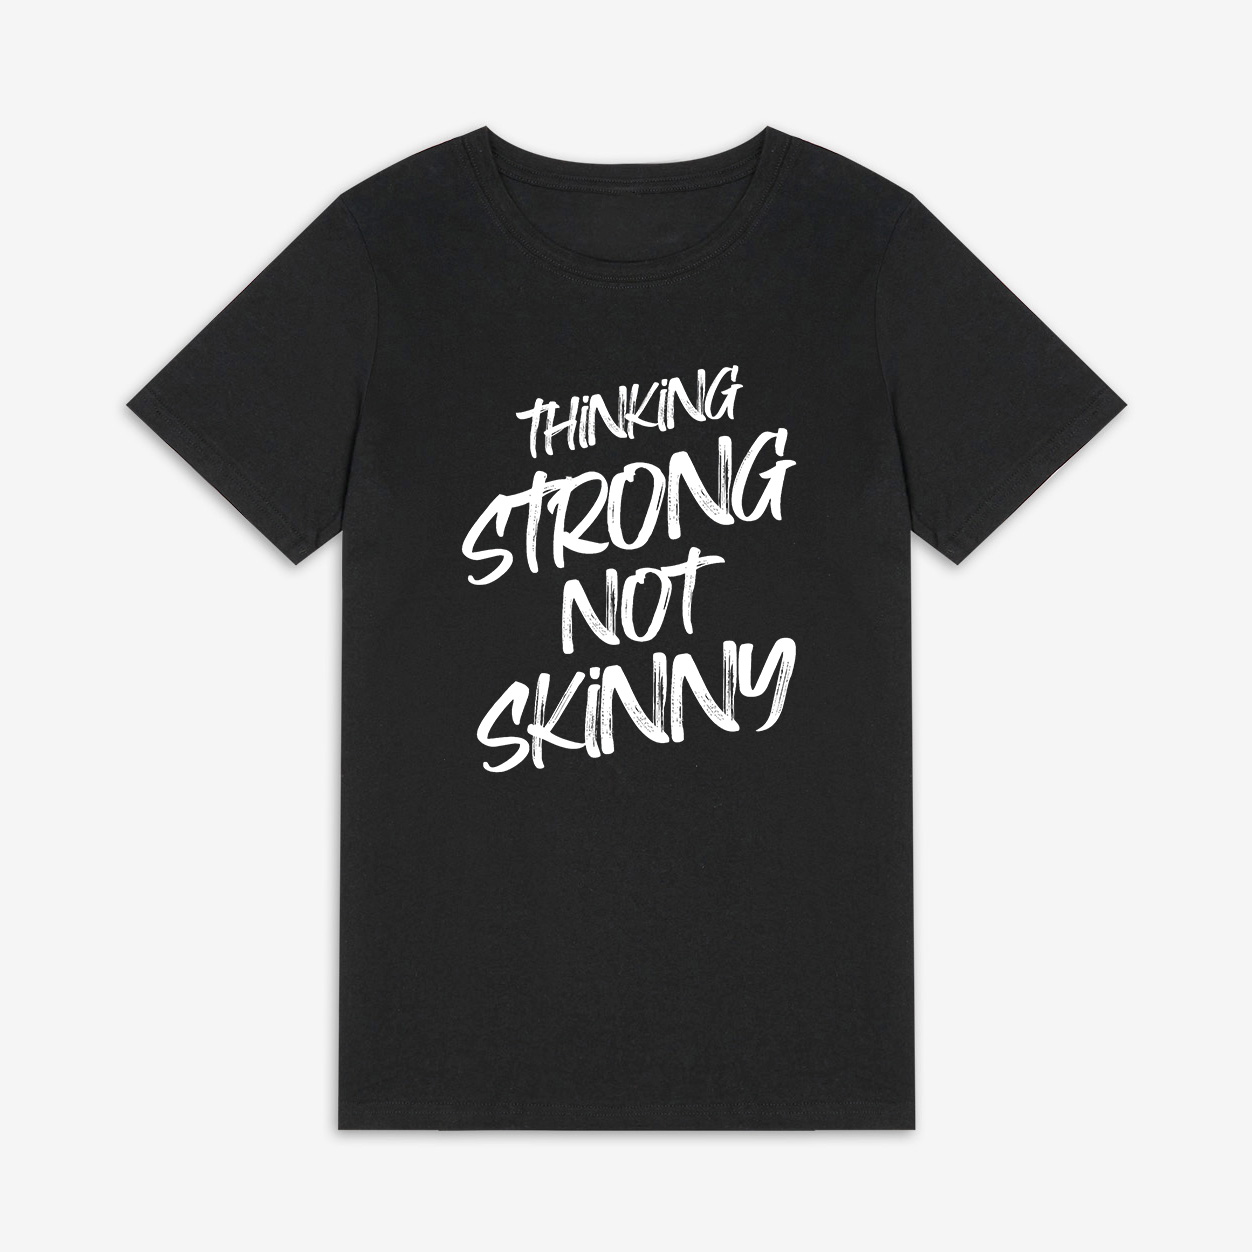 Thinking Strong Not Skinny Printed Women's T-shirt